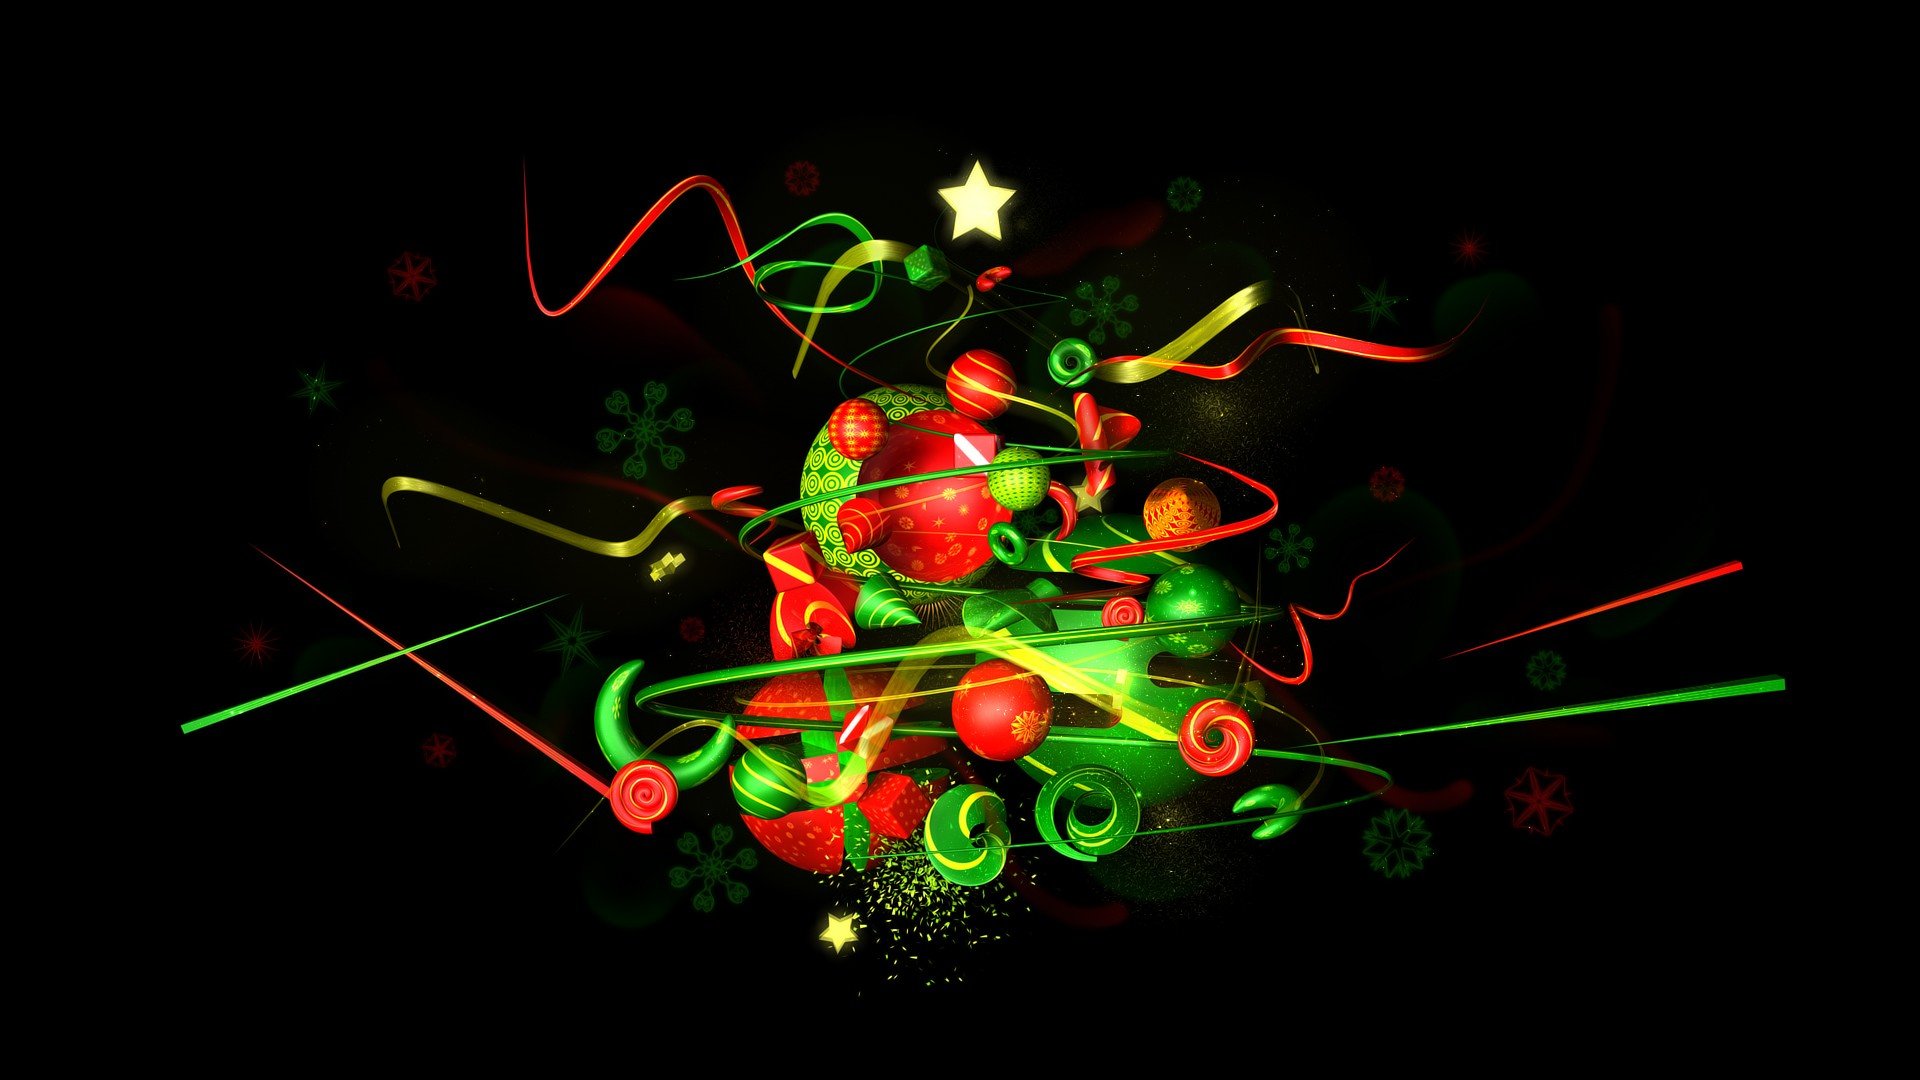 Download full hd 1080p Christmas Ornaments/Decorations PC wallpaper ID:434418 for free